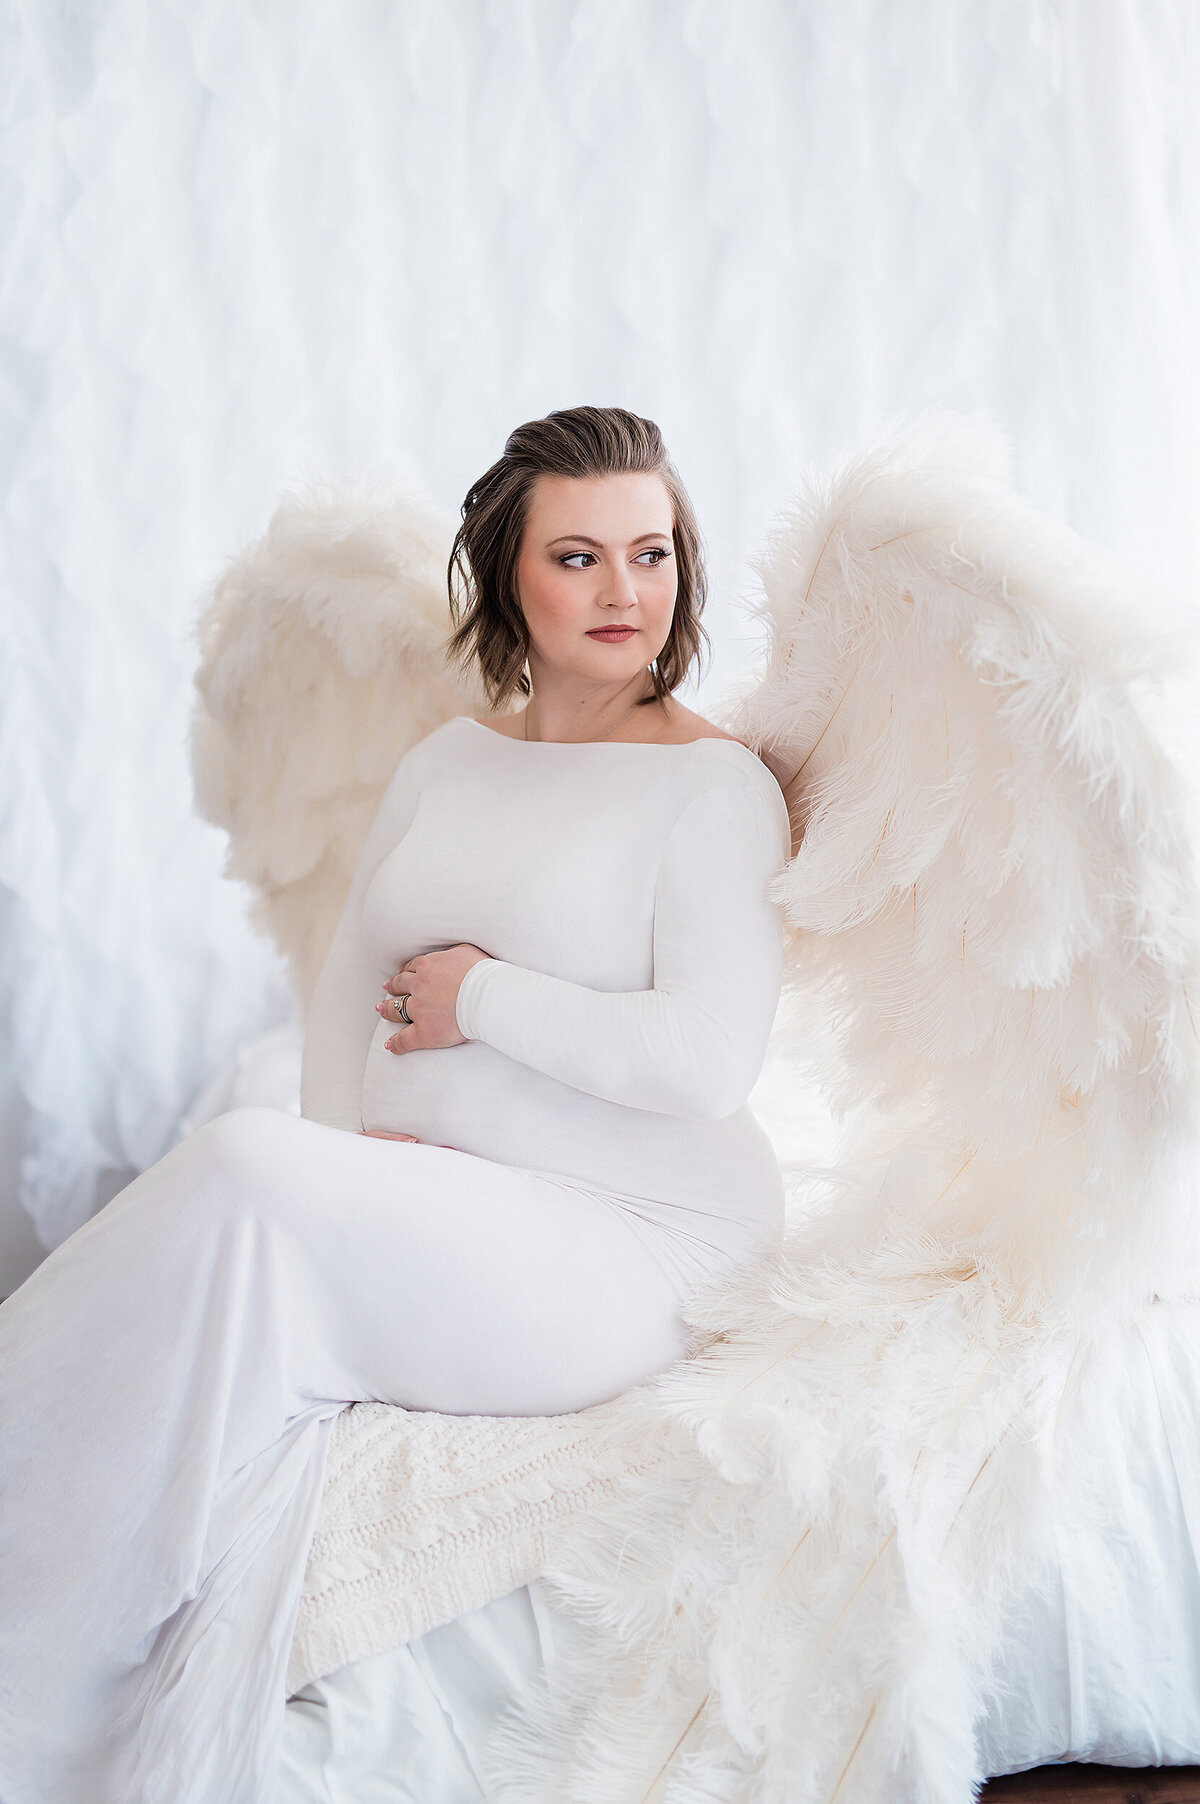 Pregnant woman sitting on a bed wearing a long white, boatneck maternity gown and angel wings made from white feathers.